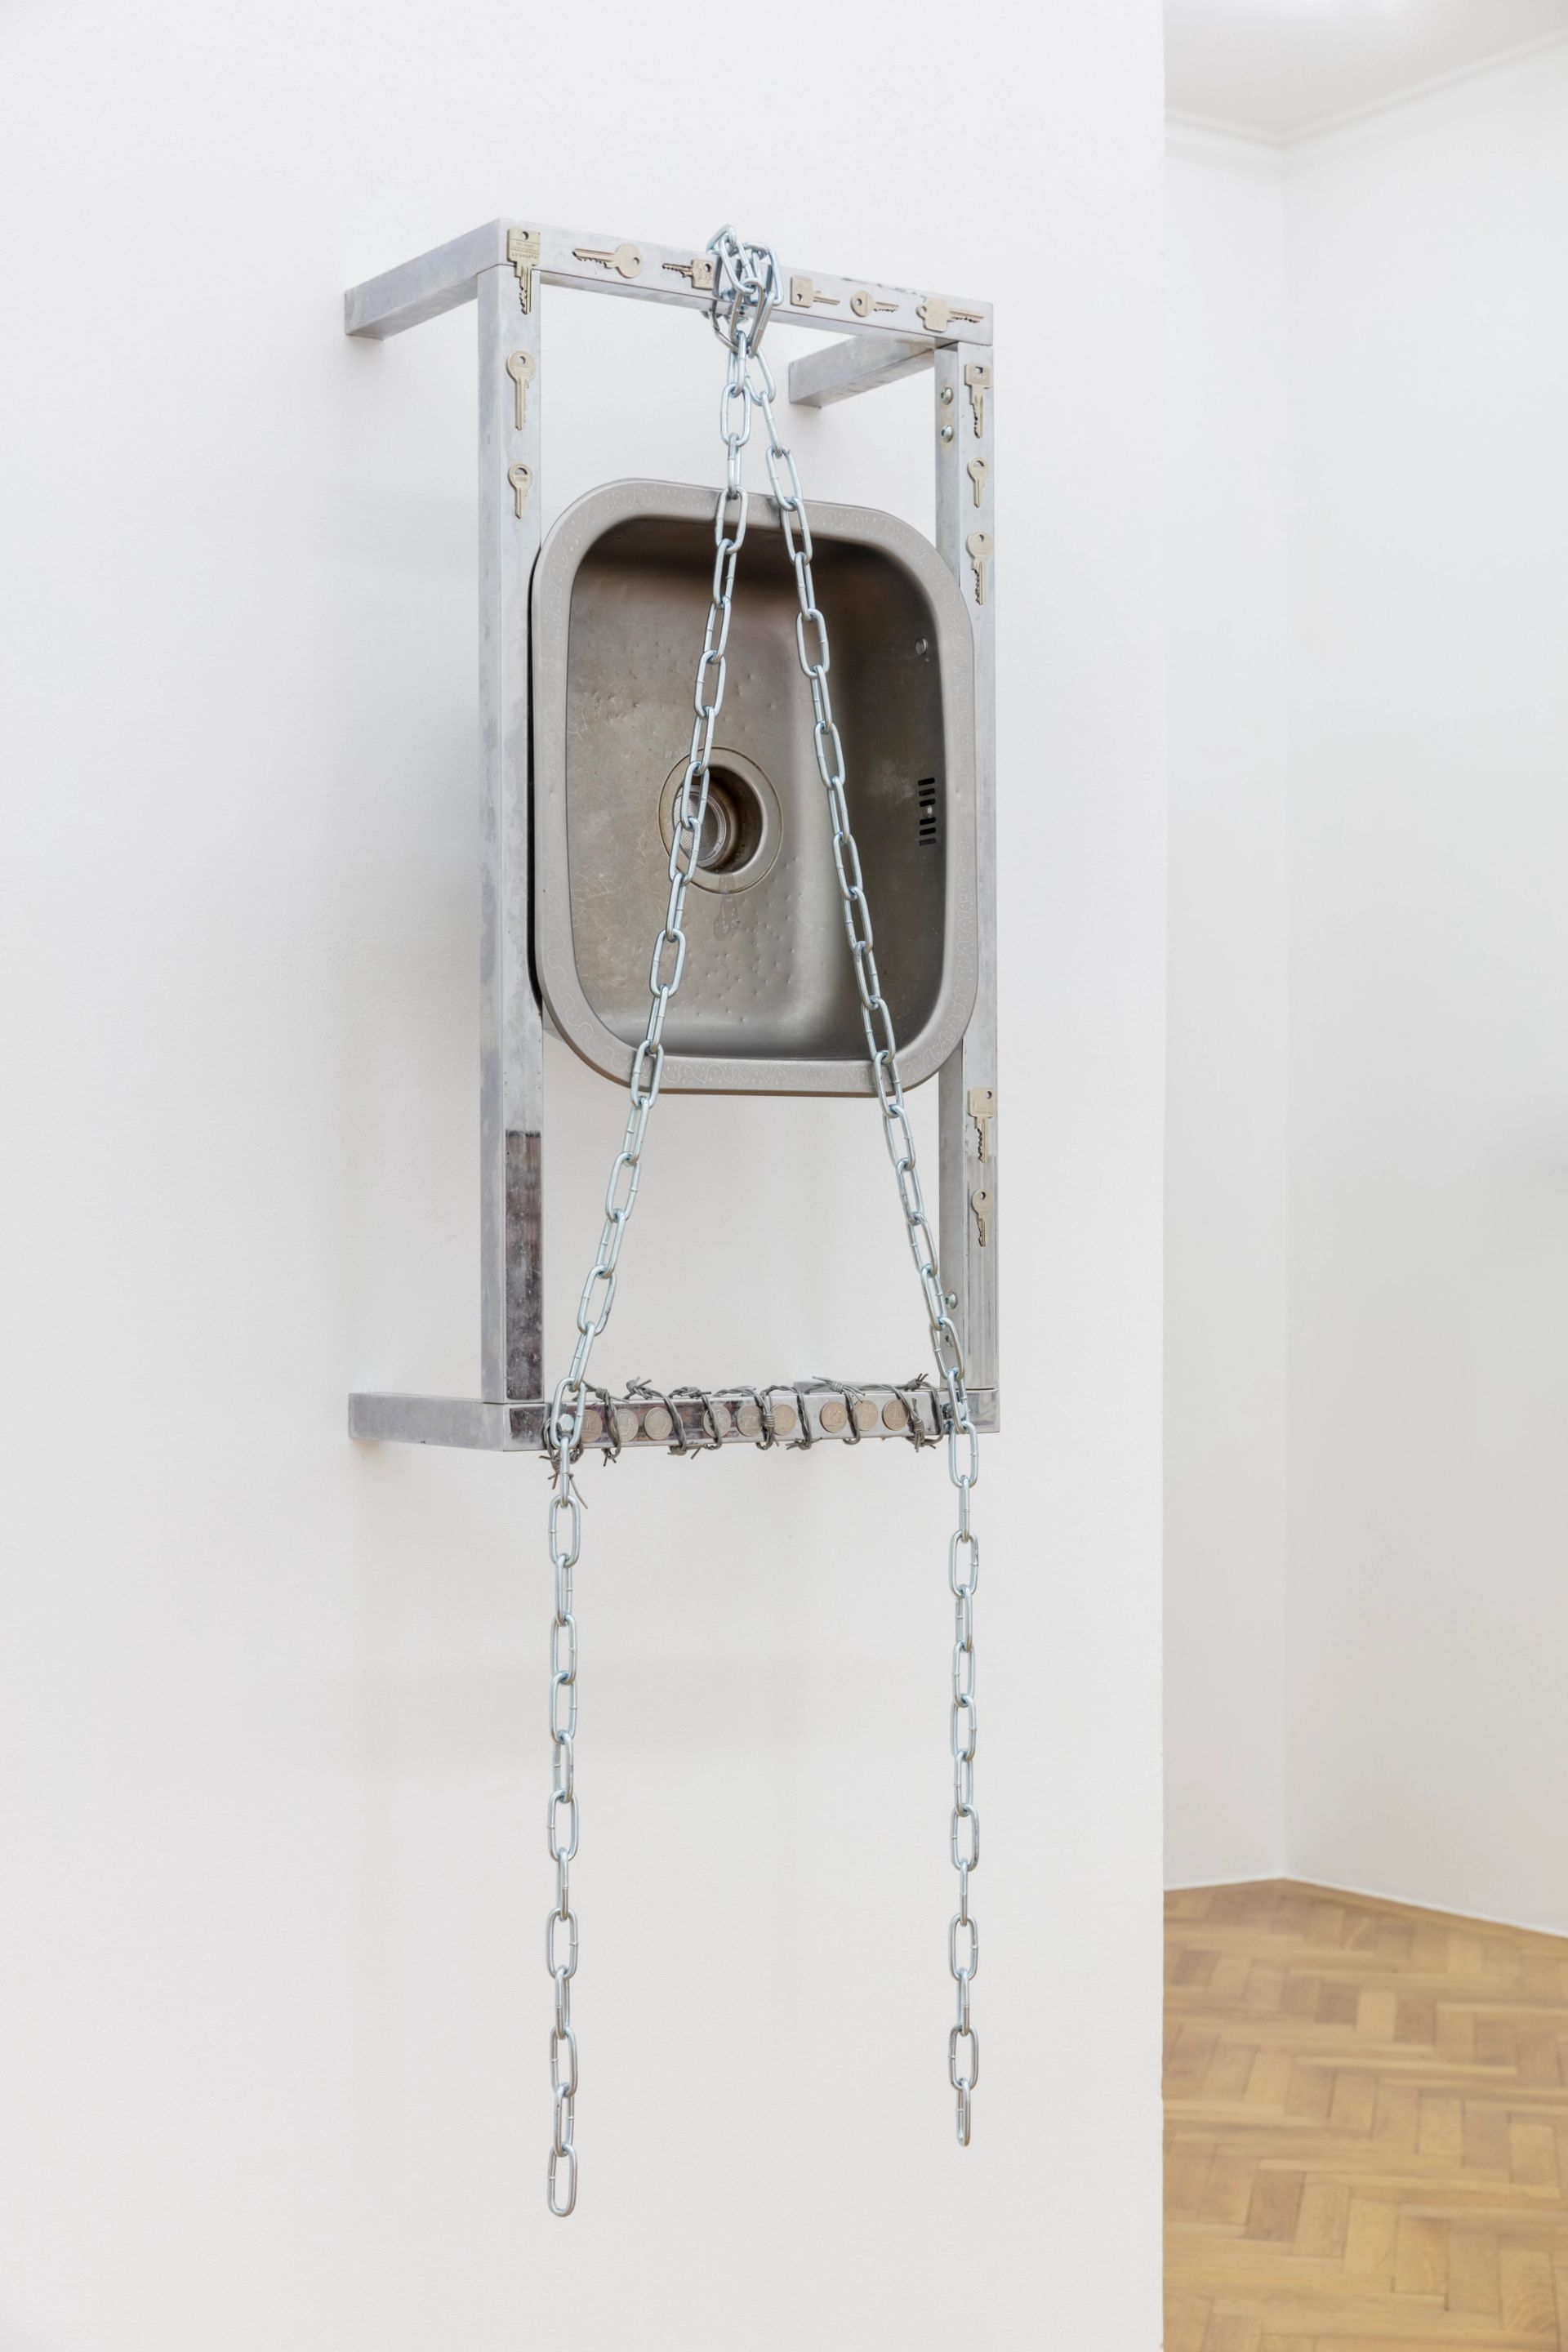 Anna McCarthy, Shackles / Kitchen, 2022, stainless steel, chrome, leather, coins, glue, bolts, wire, keys, 145 x 44.5 x 26.5 cm